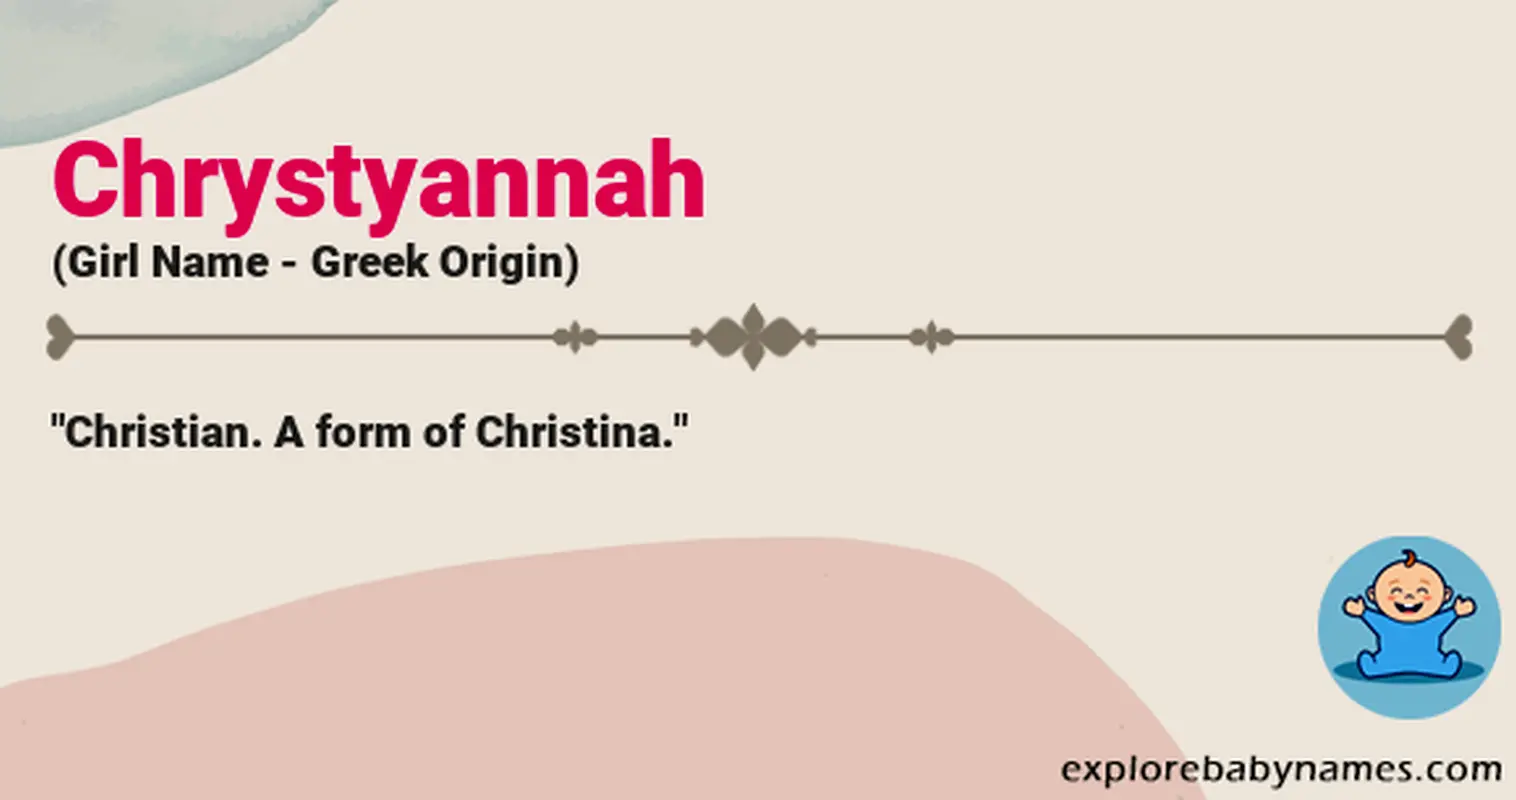 Meaning of Chrystyannah